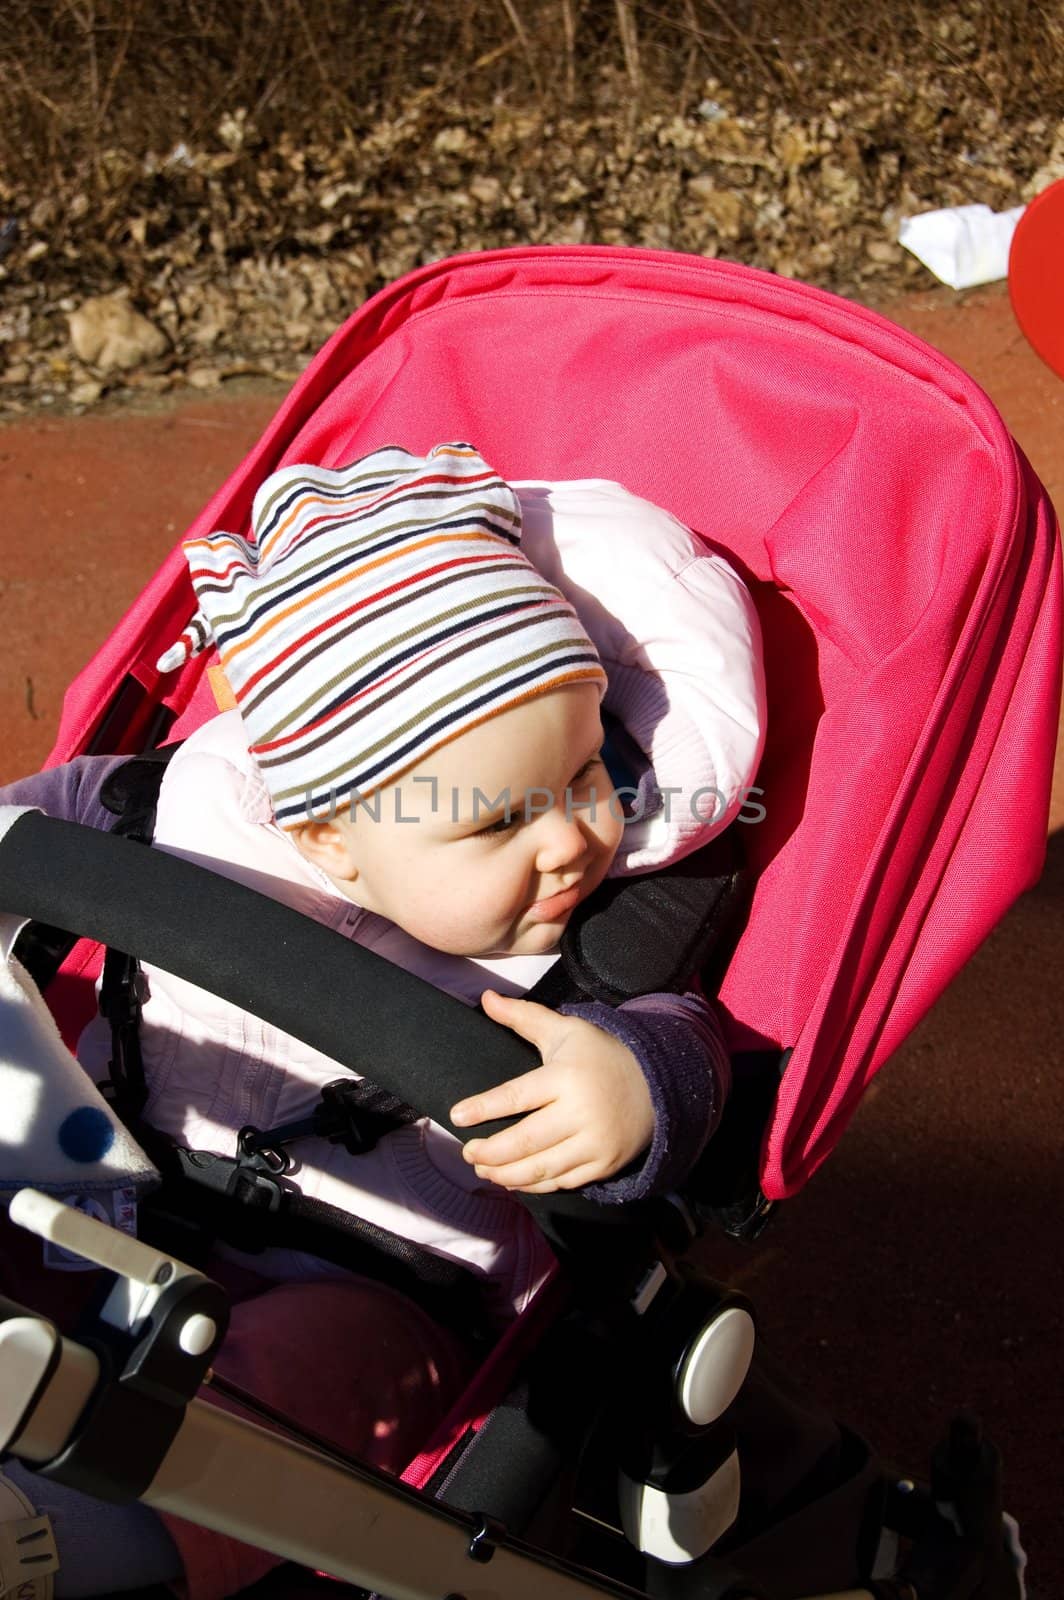 Photo of 11 months old baby sitting in pram